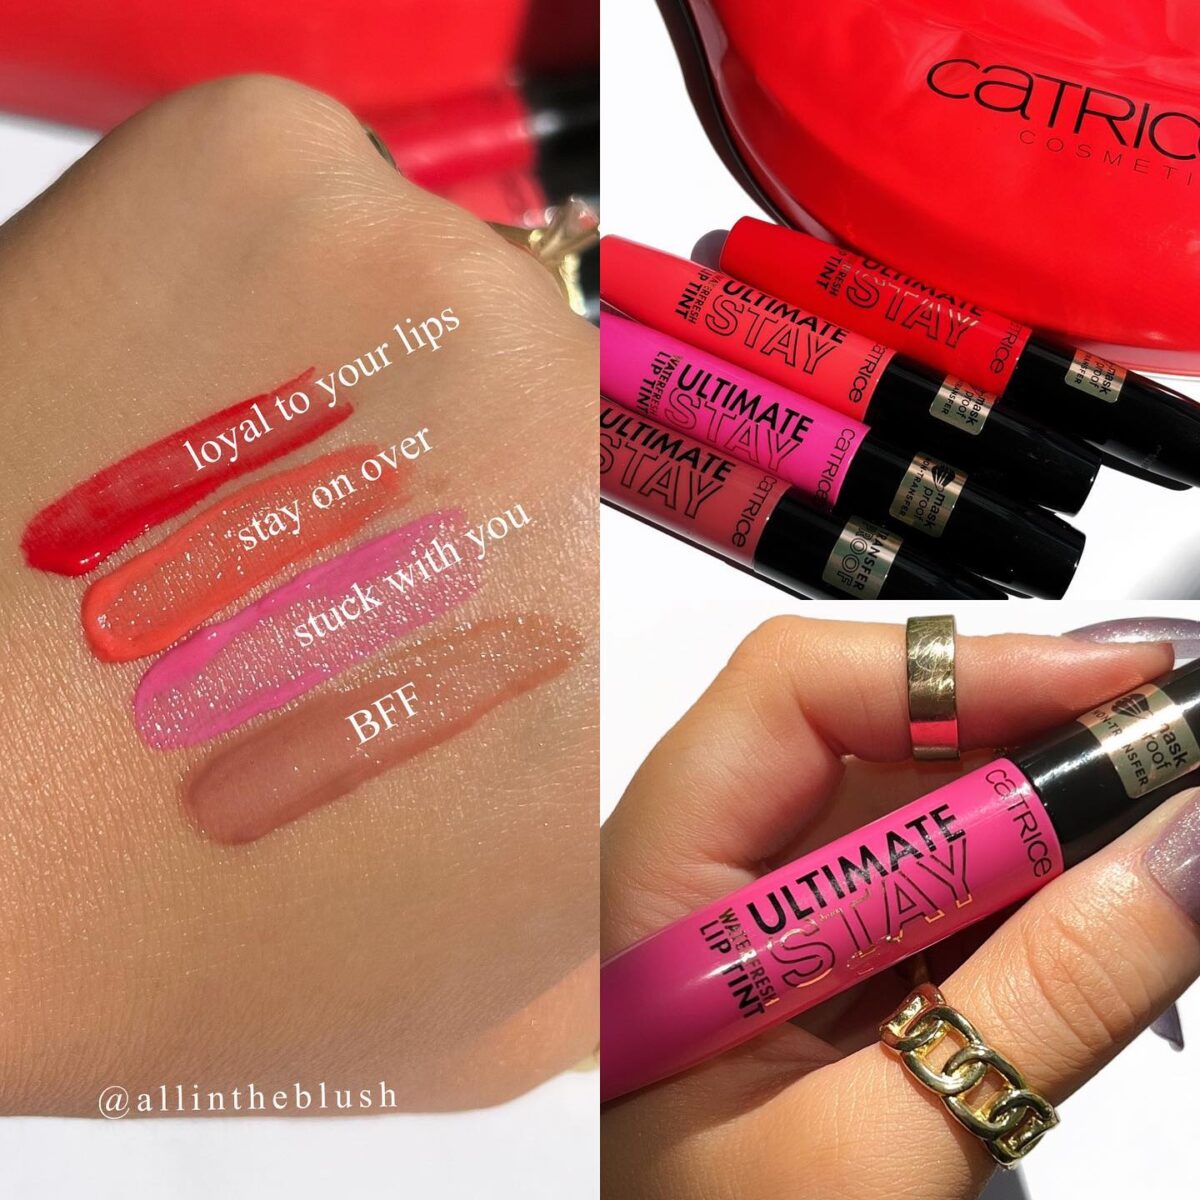 NEW from Catrice Cosmetics: Ulitmate Stay Waterfresh Lip Tint - Review & Swatches